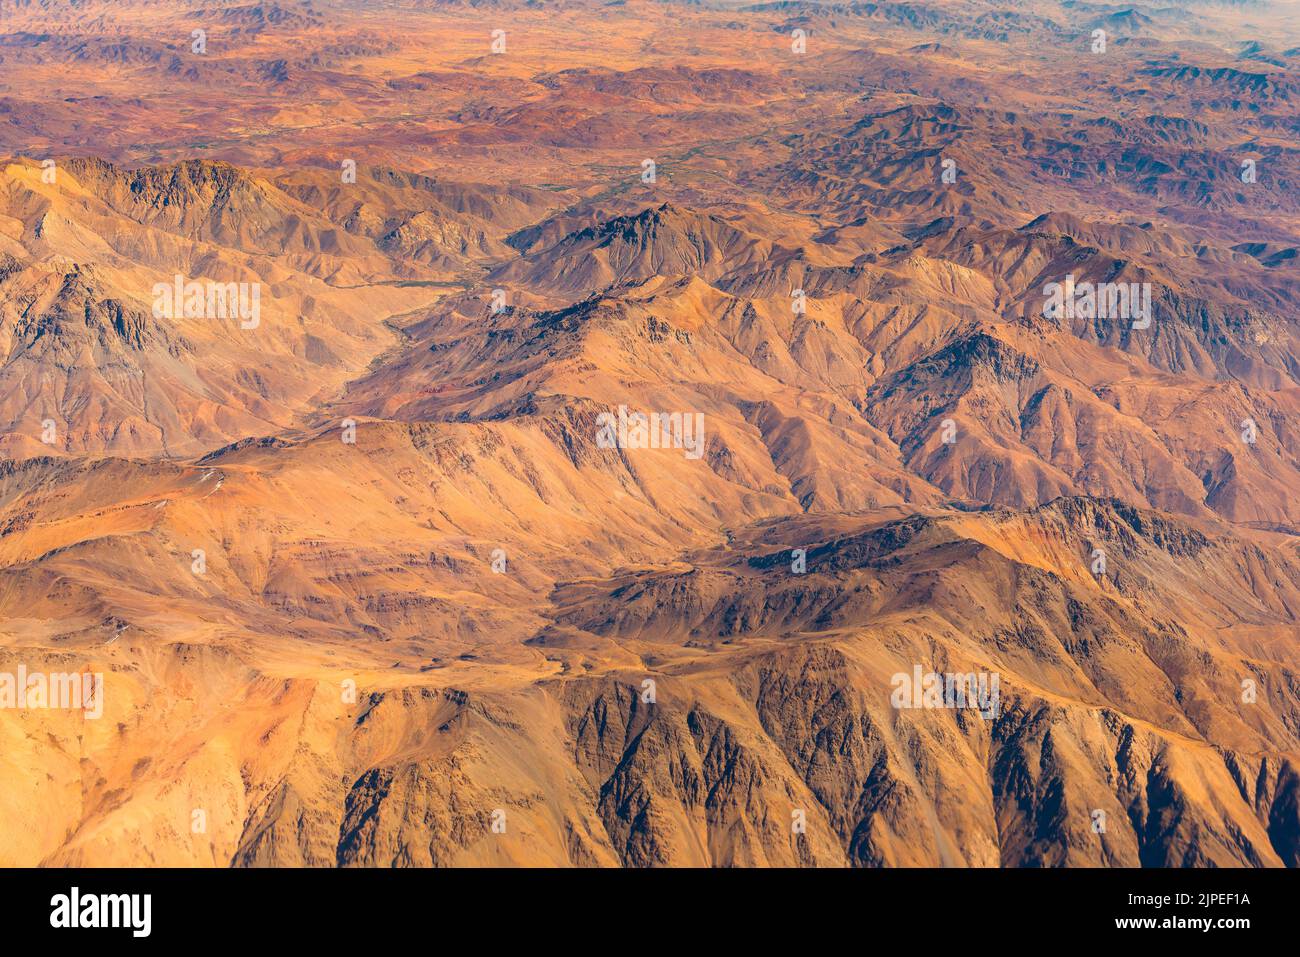 Aerial view of rivers with agriculture in the valleys between the mountains in northern Chile Stock Photo